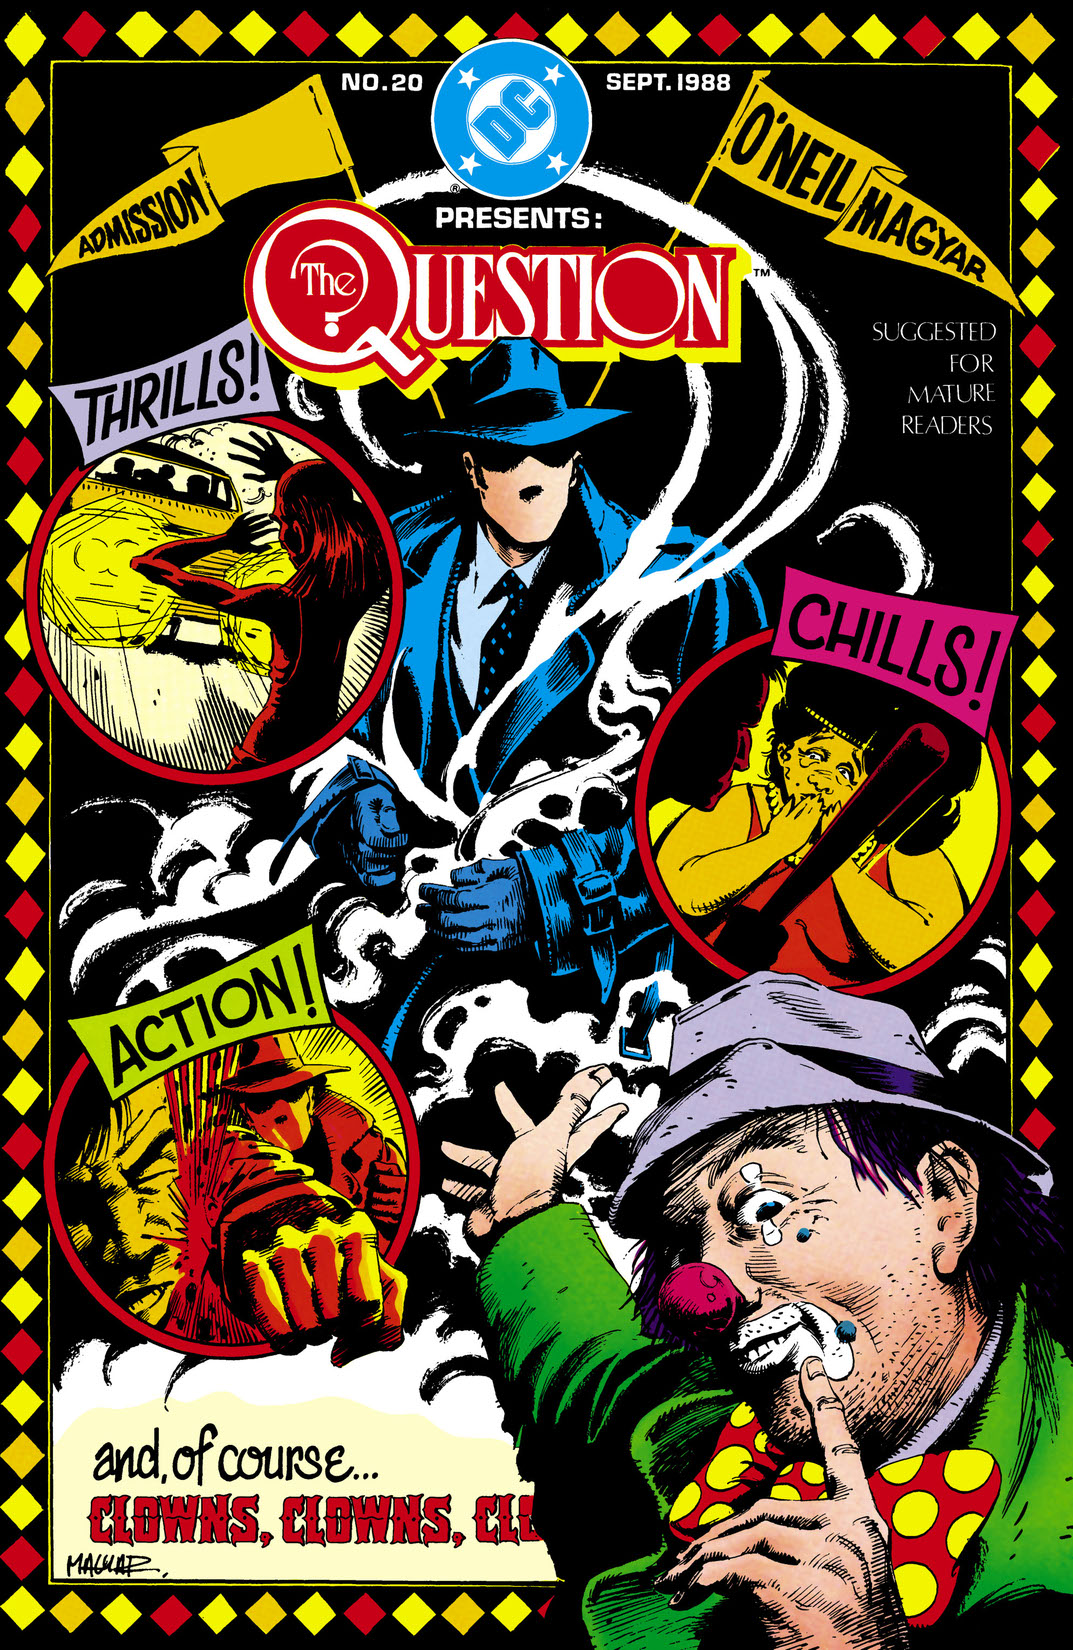 The Question (1986-) #20 preview images